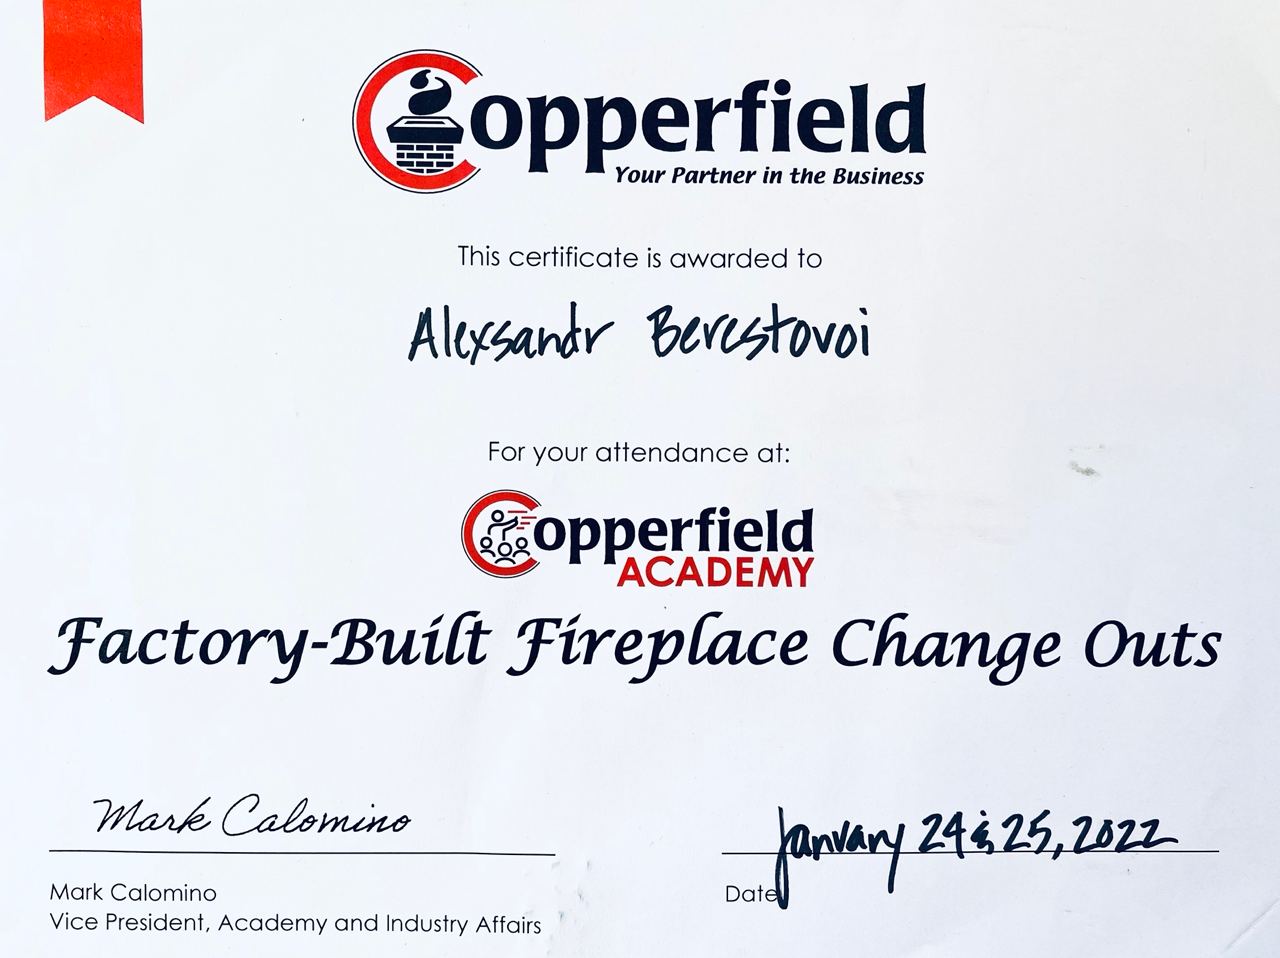 Copperfield Academy factory-built fireplace change outs Certificate by NFI